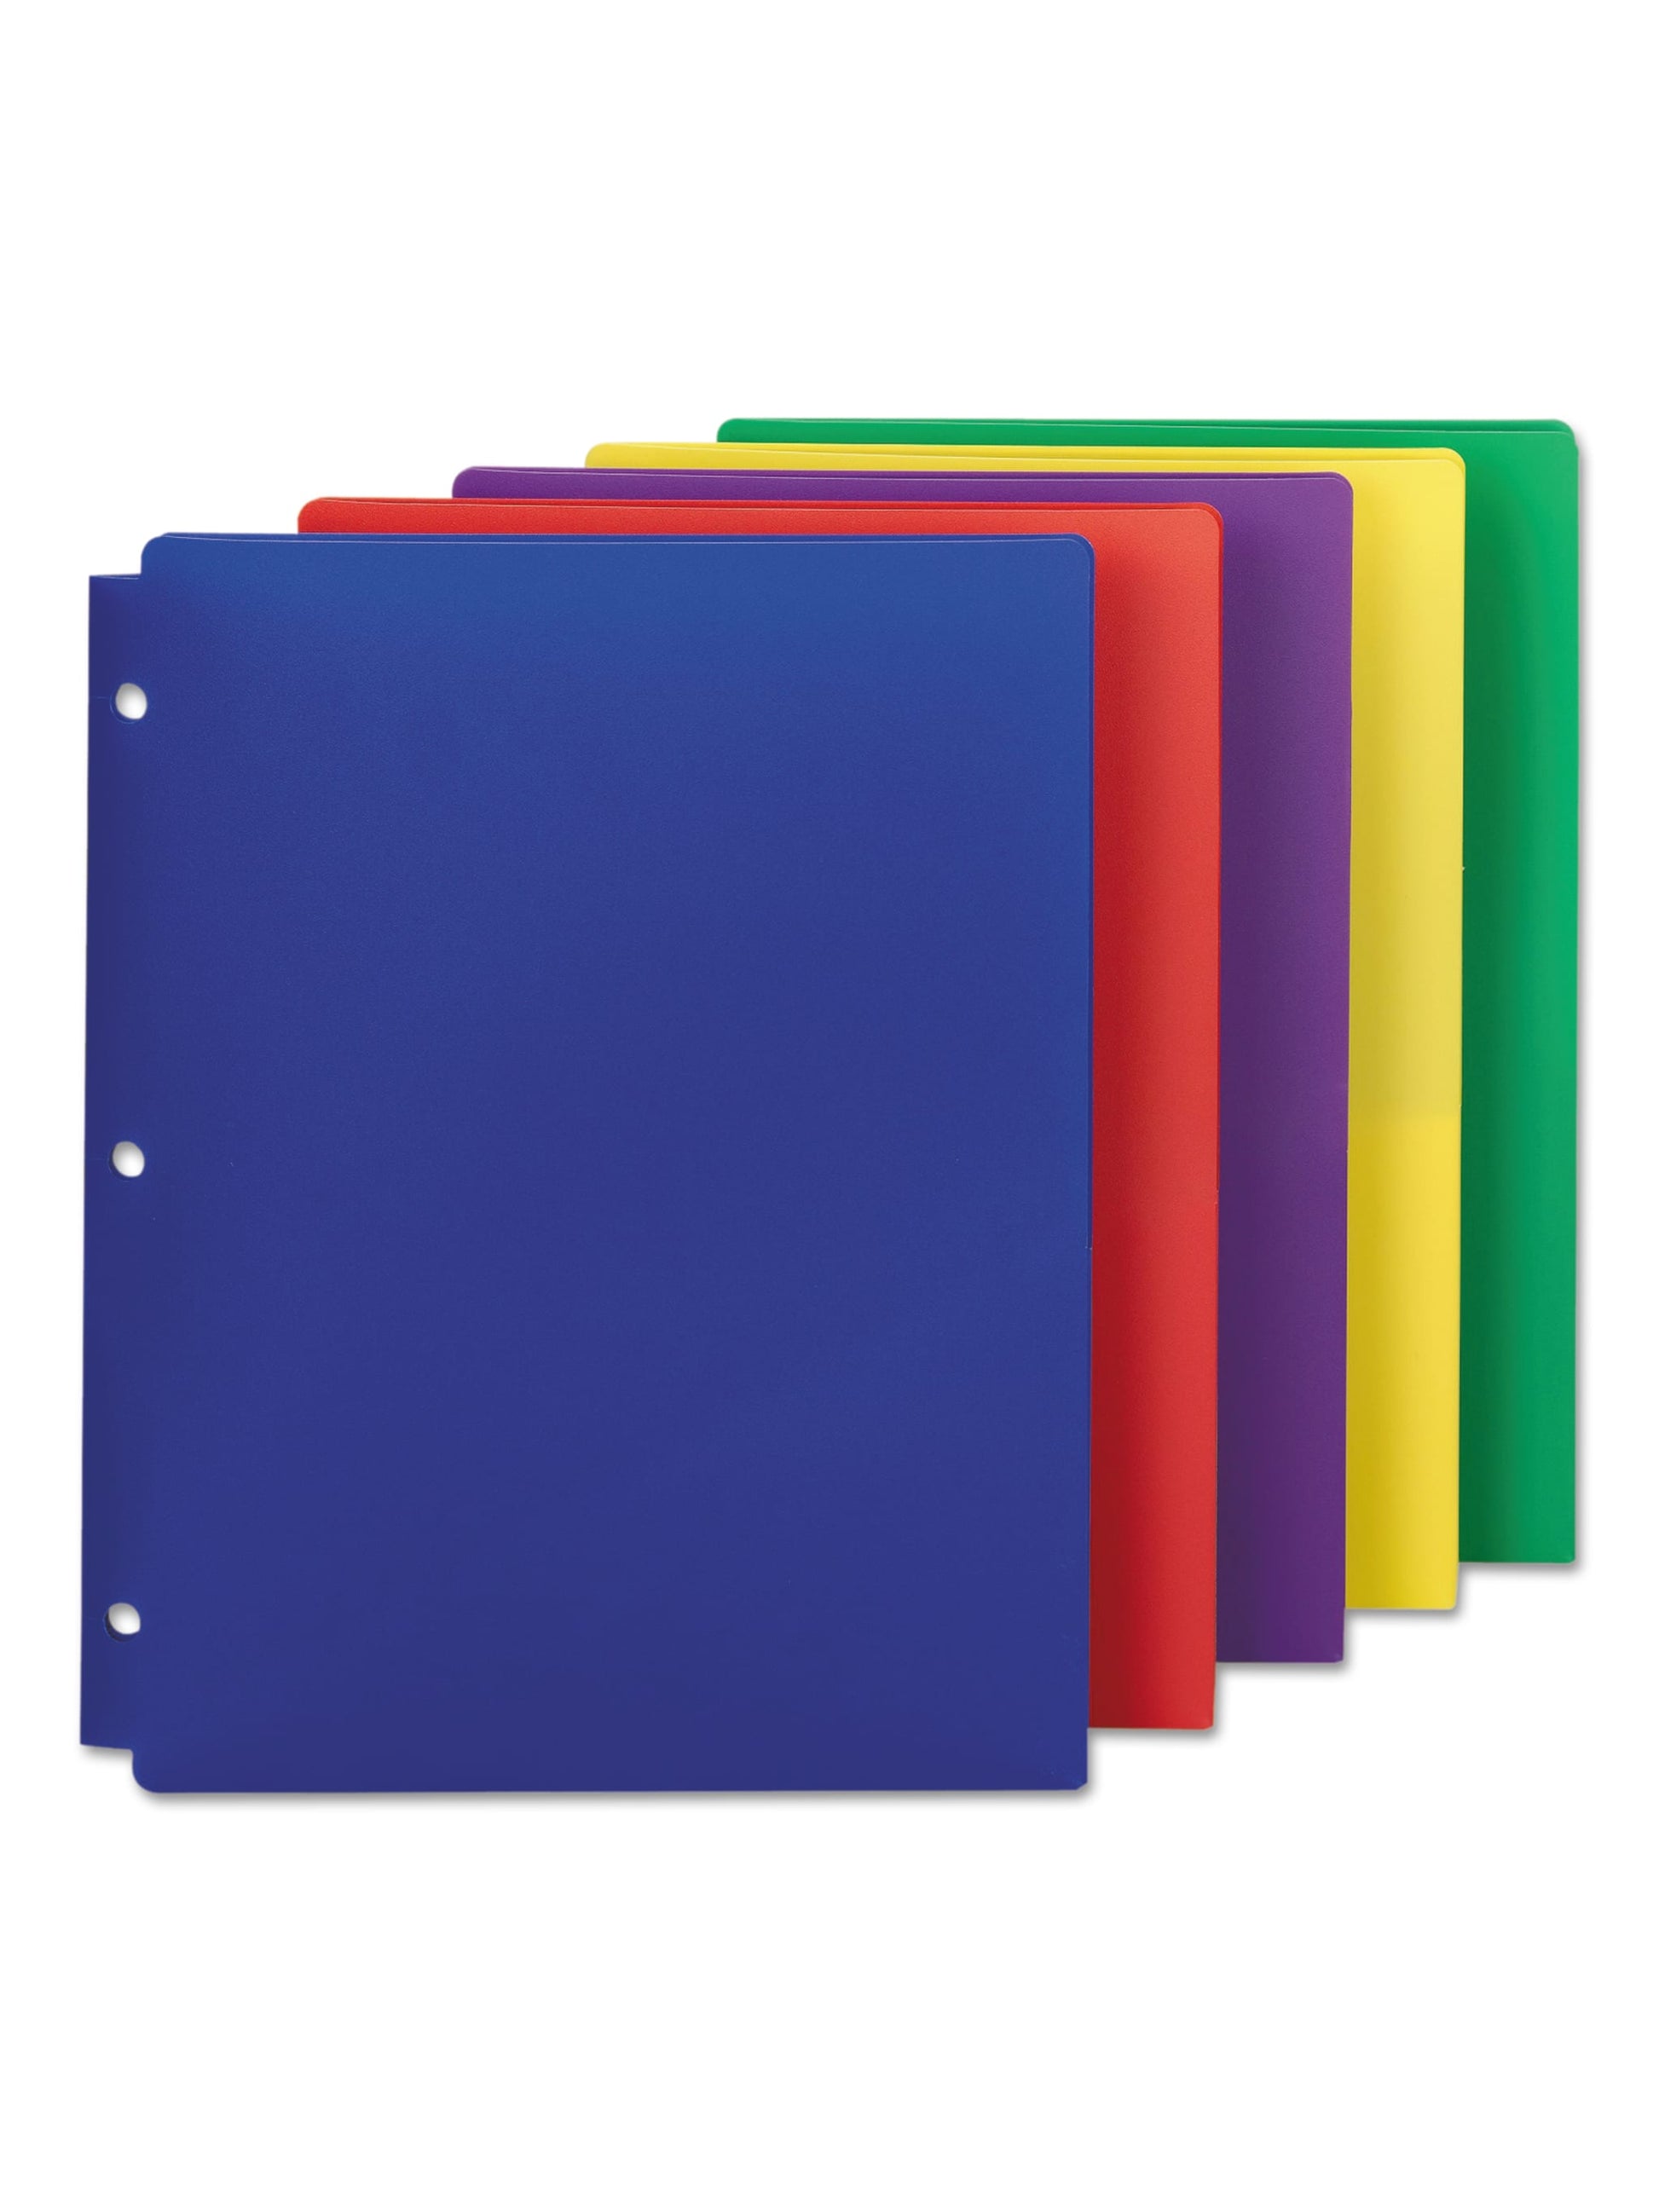 Poly Snap-In Two-Pocket Folder, Assorted Brights Color, Letter Size, Set of 1, 086486879392